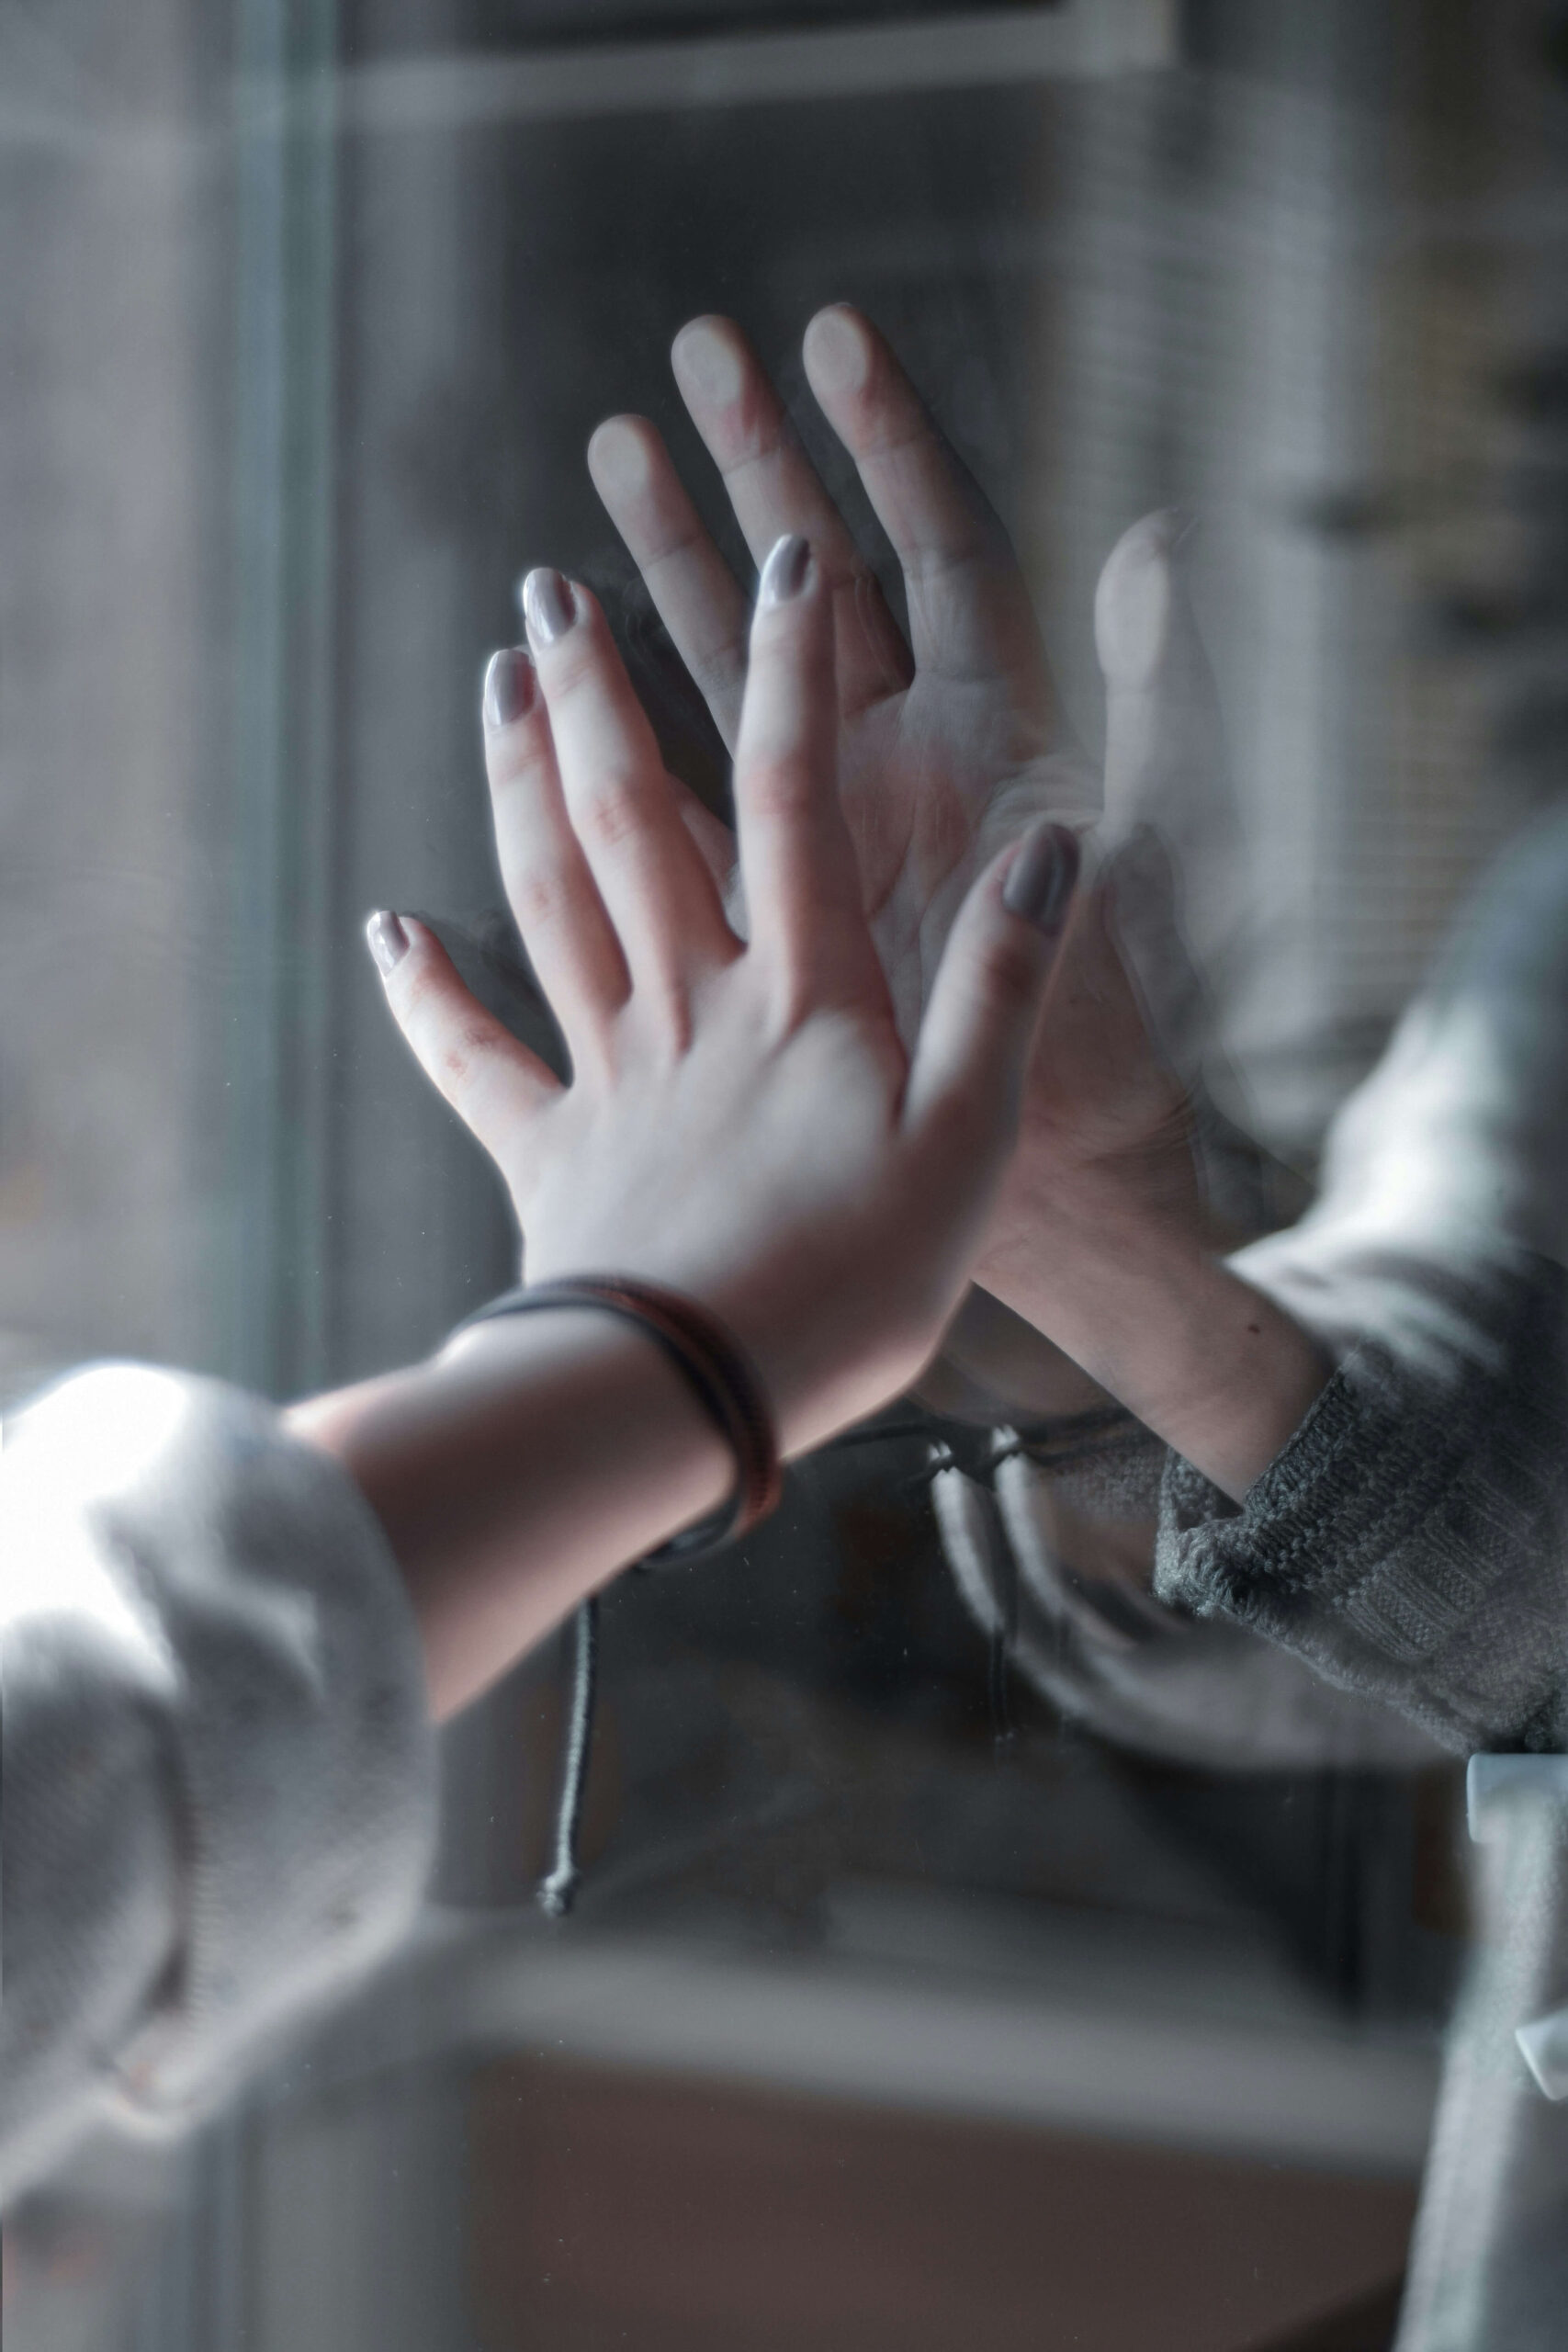 A woman reaching out to a window meeting someone on the other side also reaching out. If you want to learn how to manage your attachment style better, anxiety counseling in NYC can help! Call now to begin.